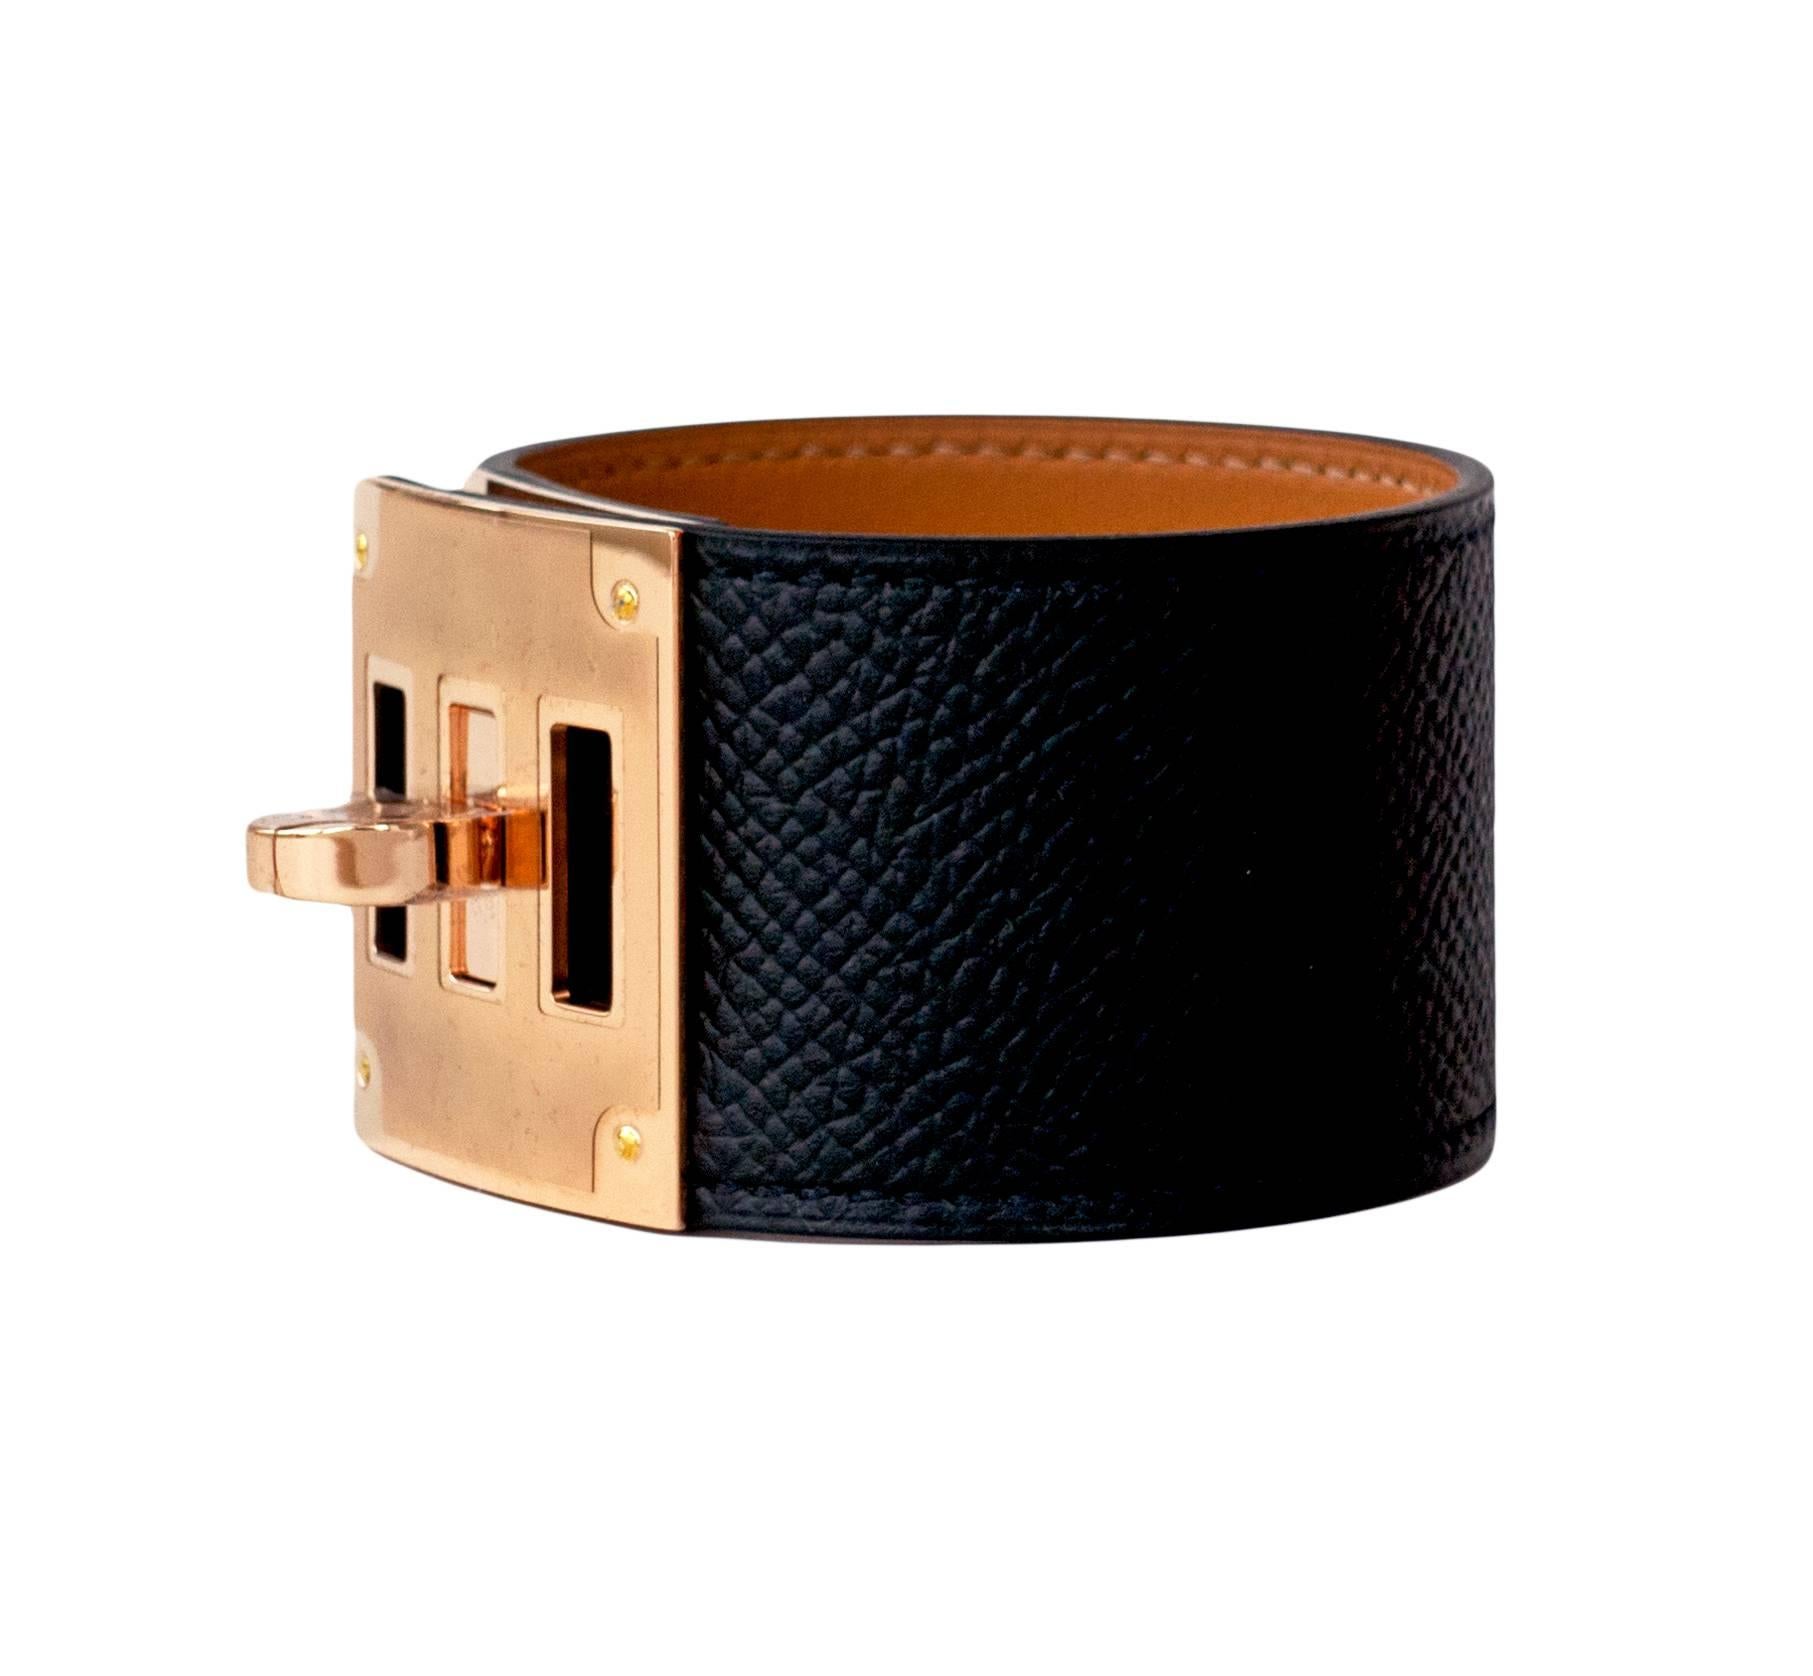 Hermes Black Kelly Dog Epsom Rose Gold Hardware Leather Cuff Bracelet 
Store fresh. Pristine condition.
Perfect gift! Comes full set with Hermes velvet pouch, box and ribbon.
Leather bracelet with Rose Gold is the latest release from